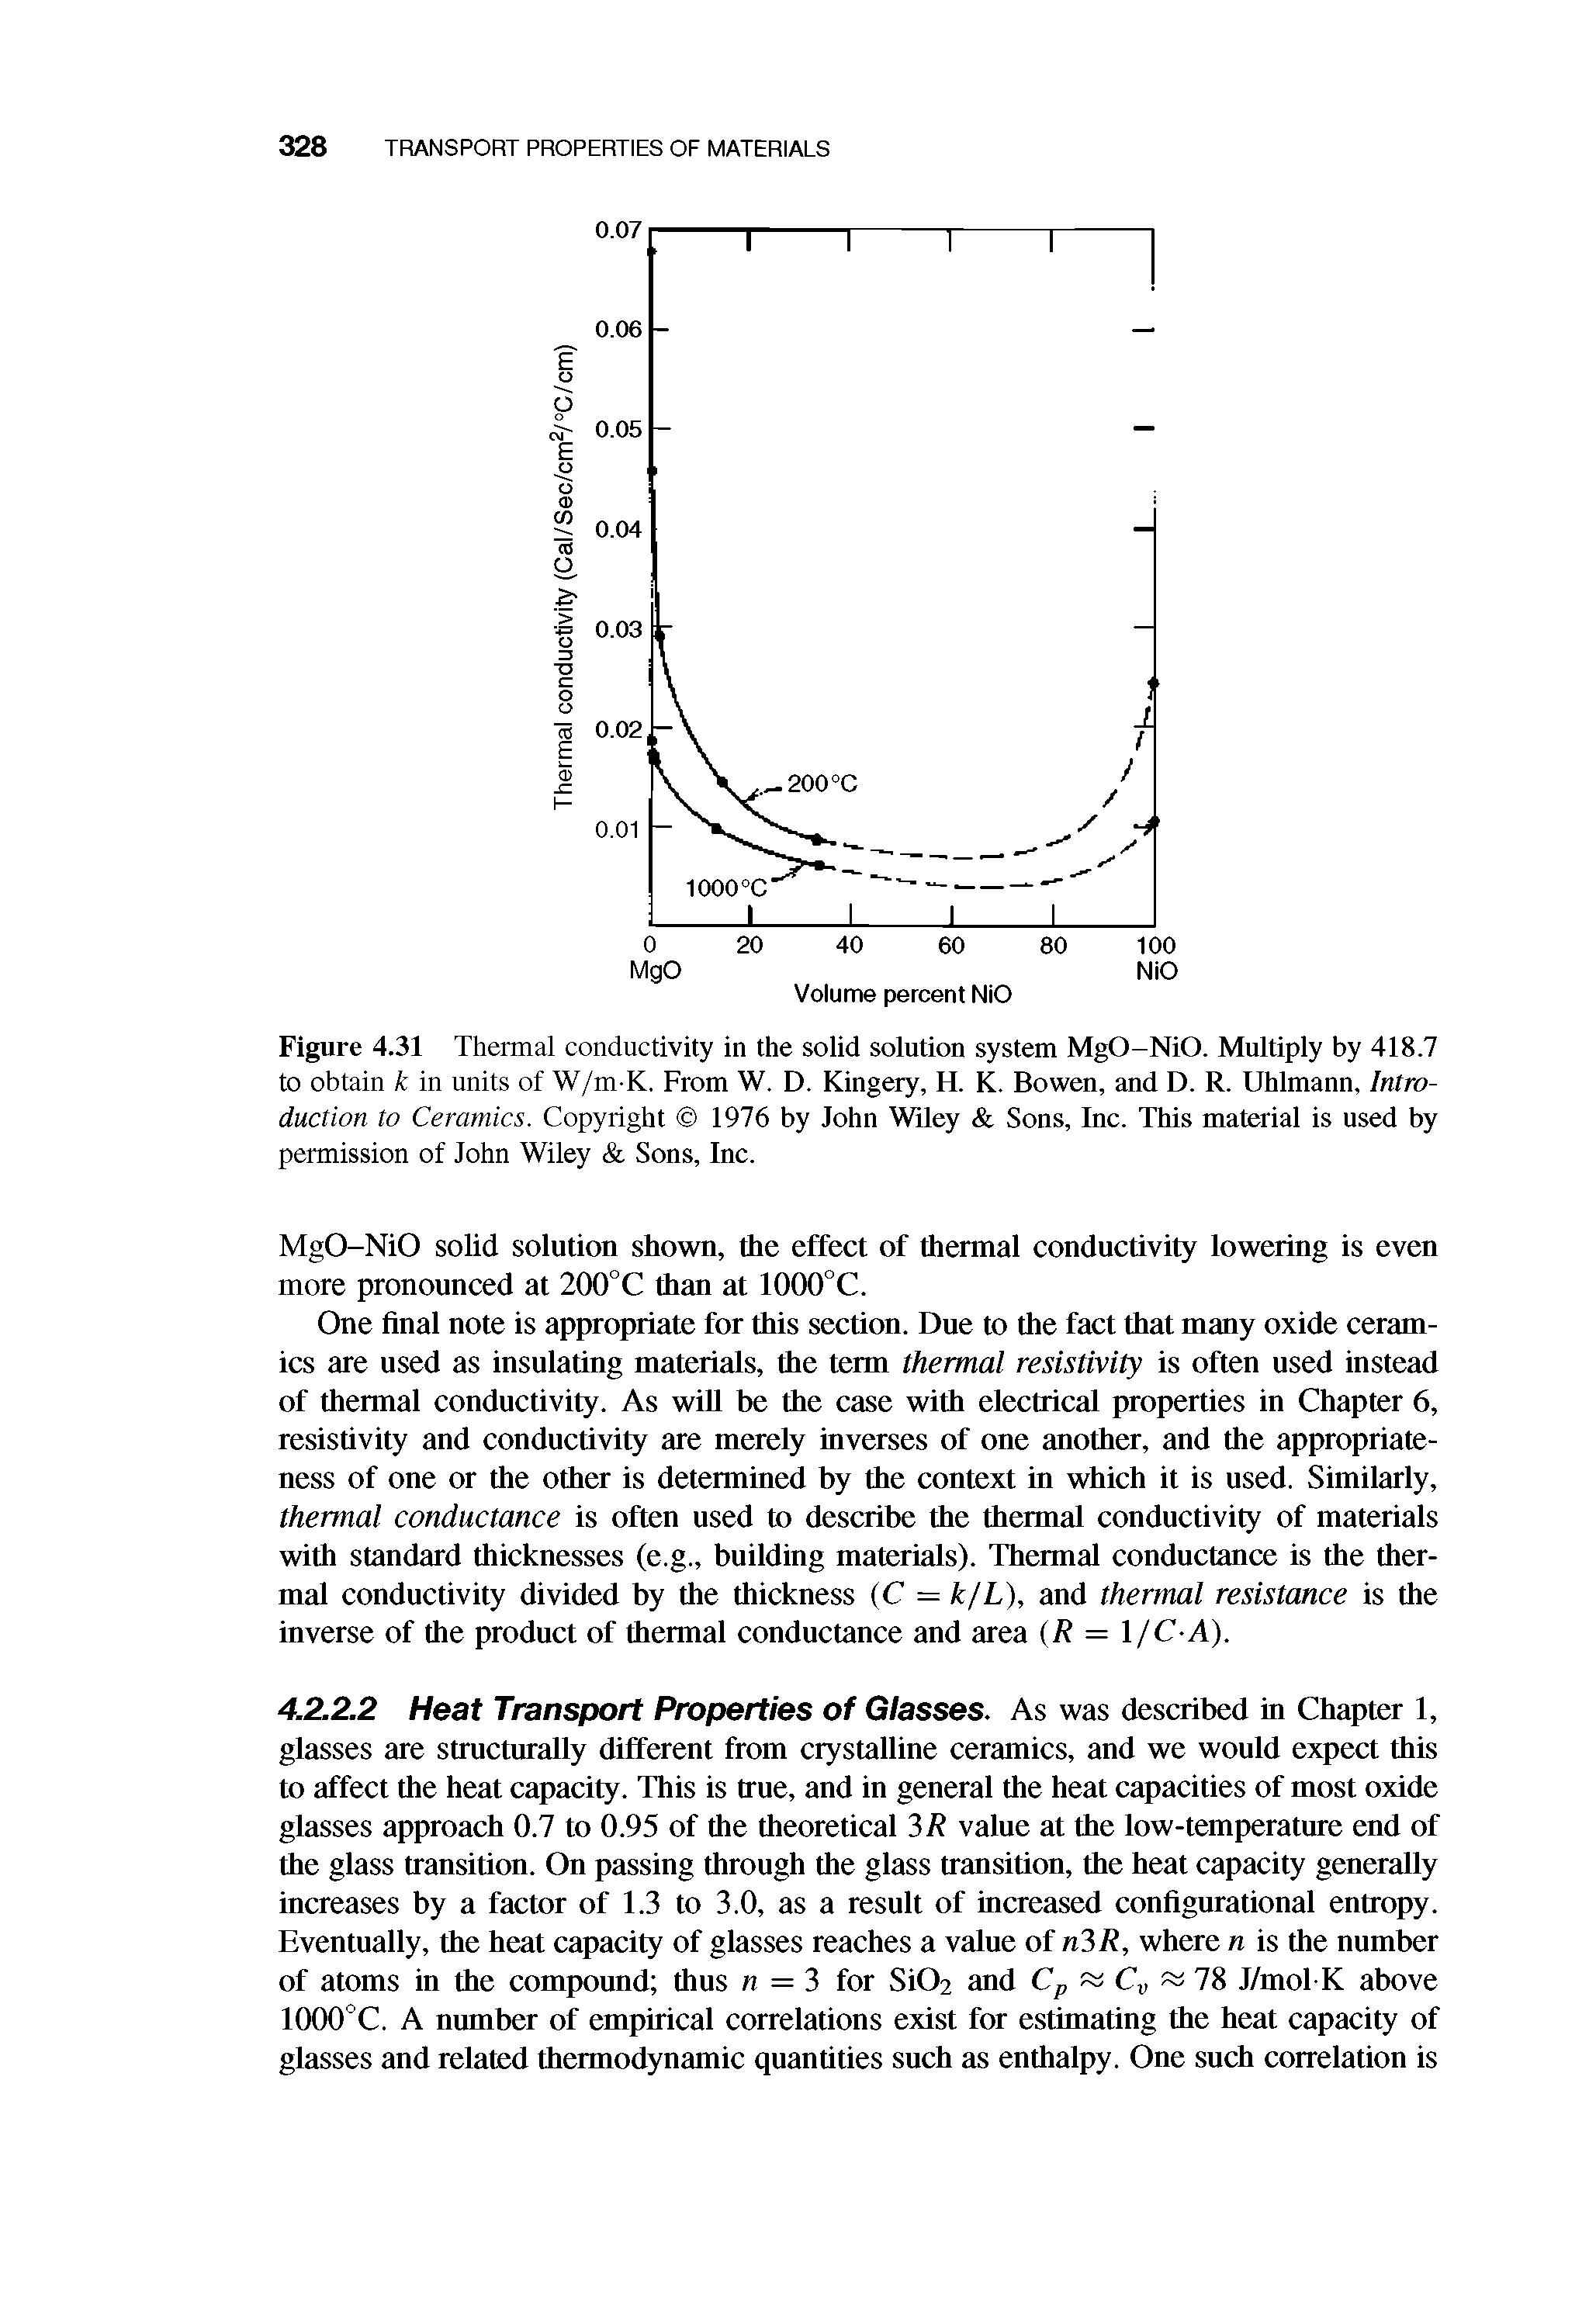 Figure 4.31 Thermal conductivity in the solid solution system MgO-NiO. Multiply by 418.7 to obtain k in units of W/m K. From W. D. Kingery, H. K. Bowen, and D. R. Uhlmann, Introduction to Ceramics. Copyright 1976 by John Wiley Sons, Inc. This material is used by permission of John Wiley Sons, Inc.